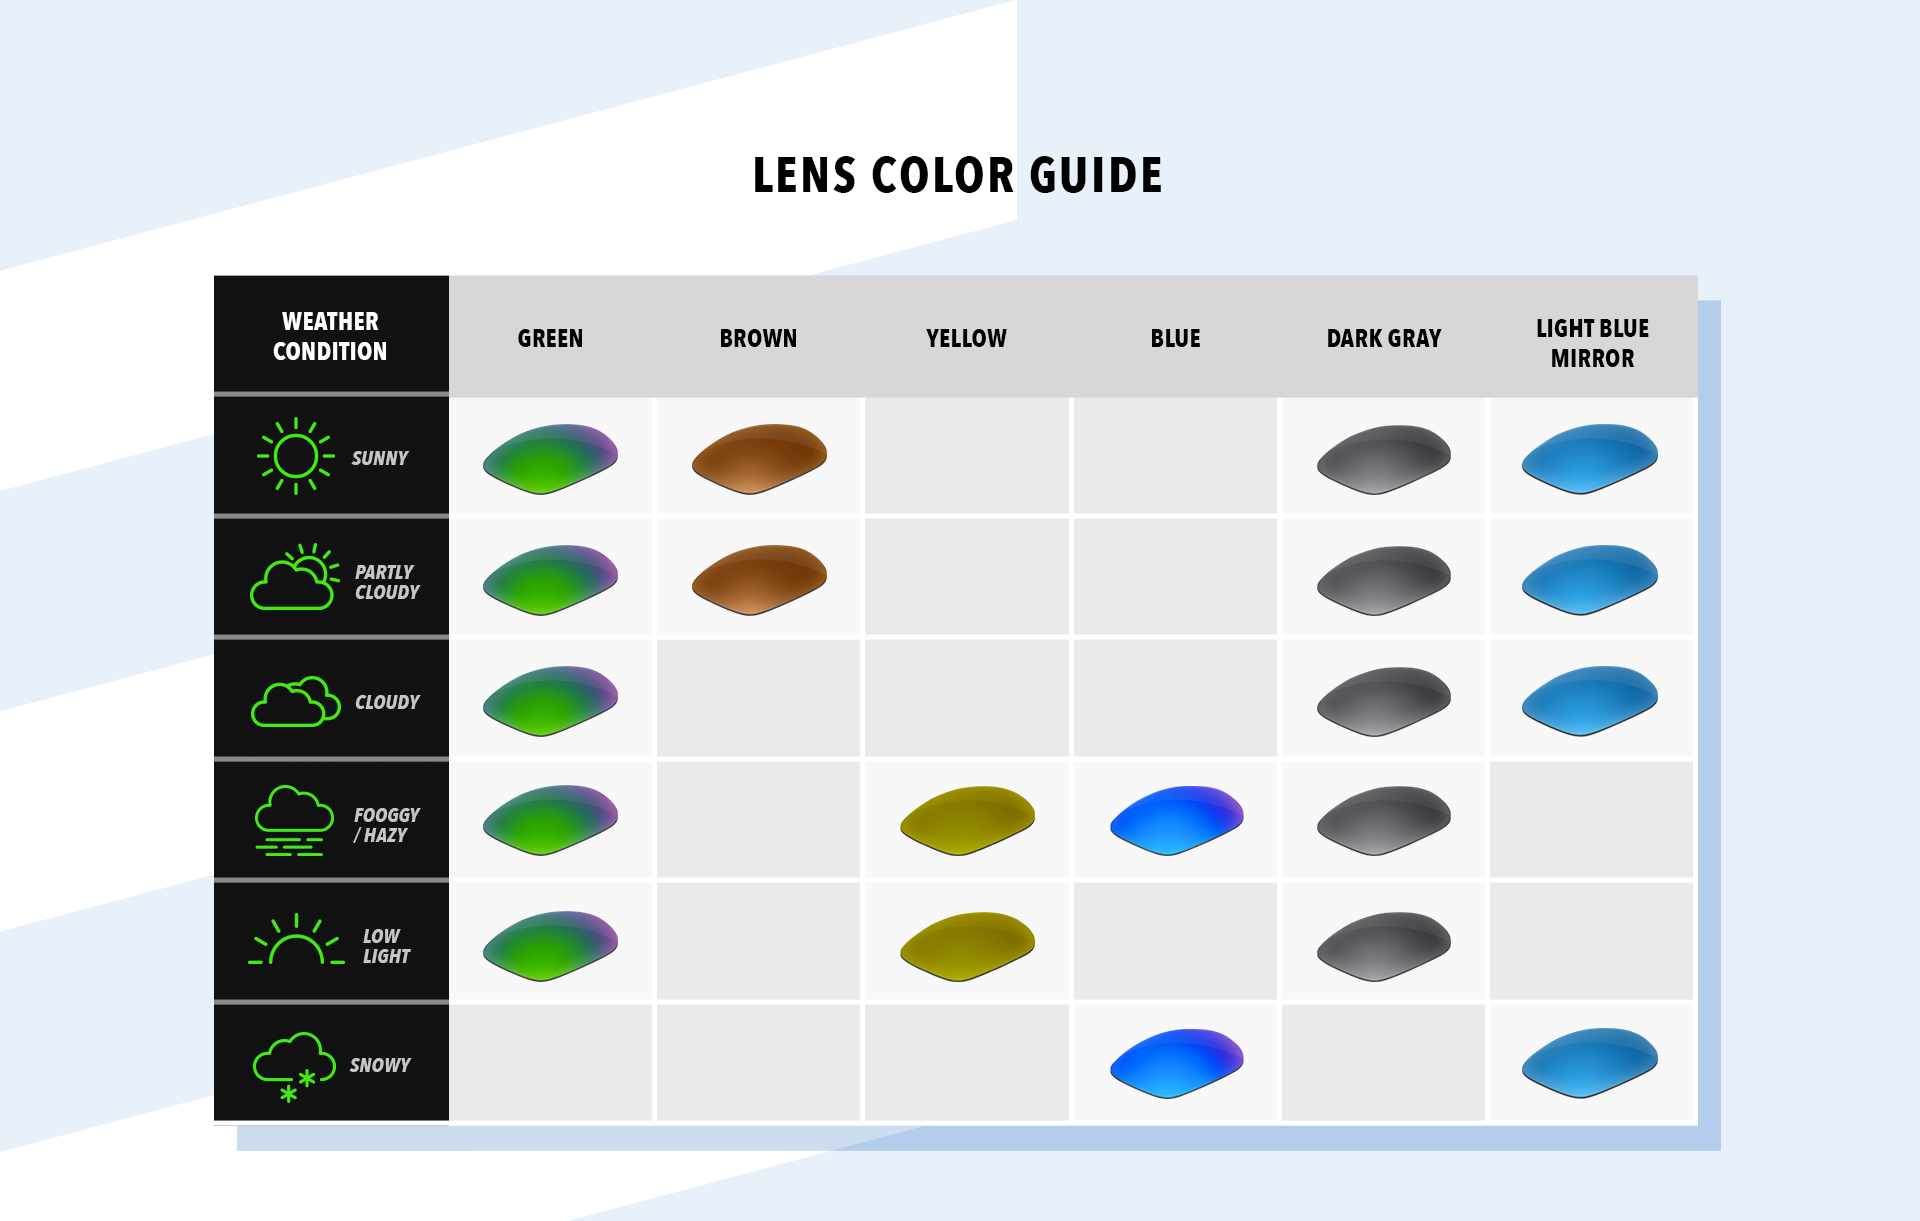 Sunglass Lens Colors and Their Applications | Blog | Eyebuydirect